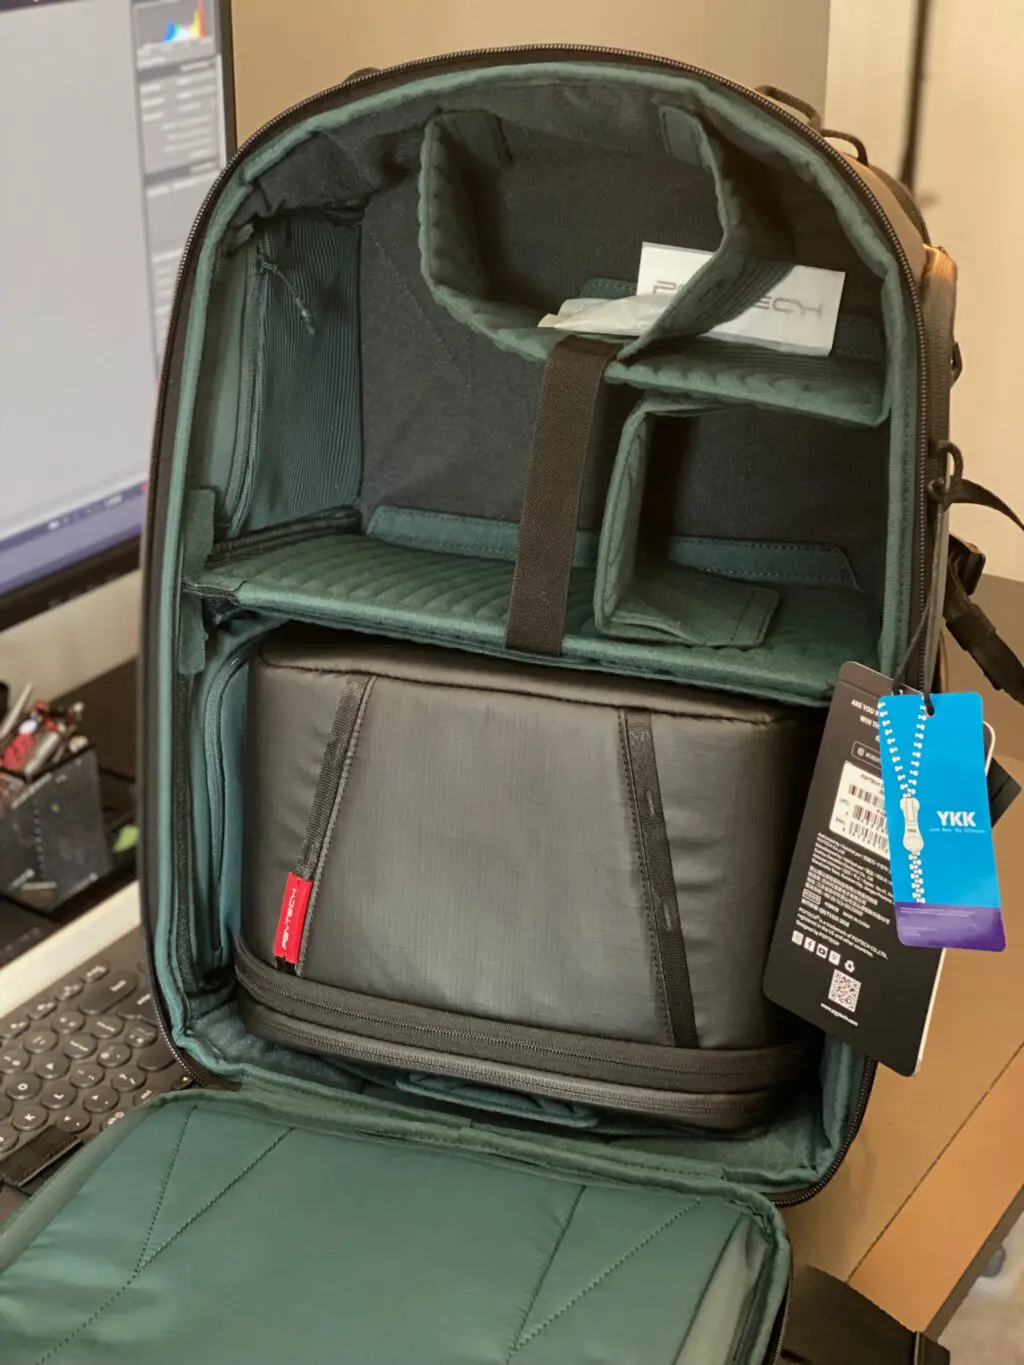 A PGYtech OneMo backpack open on a desk